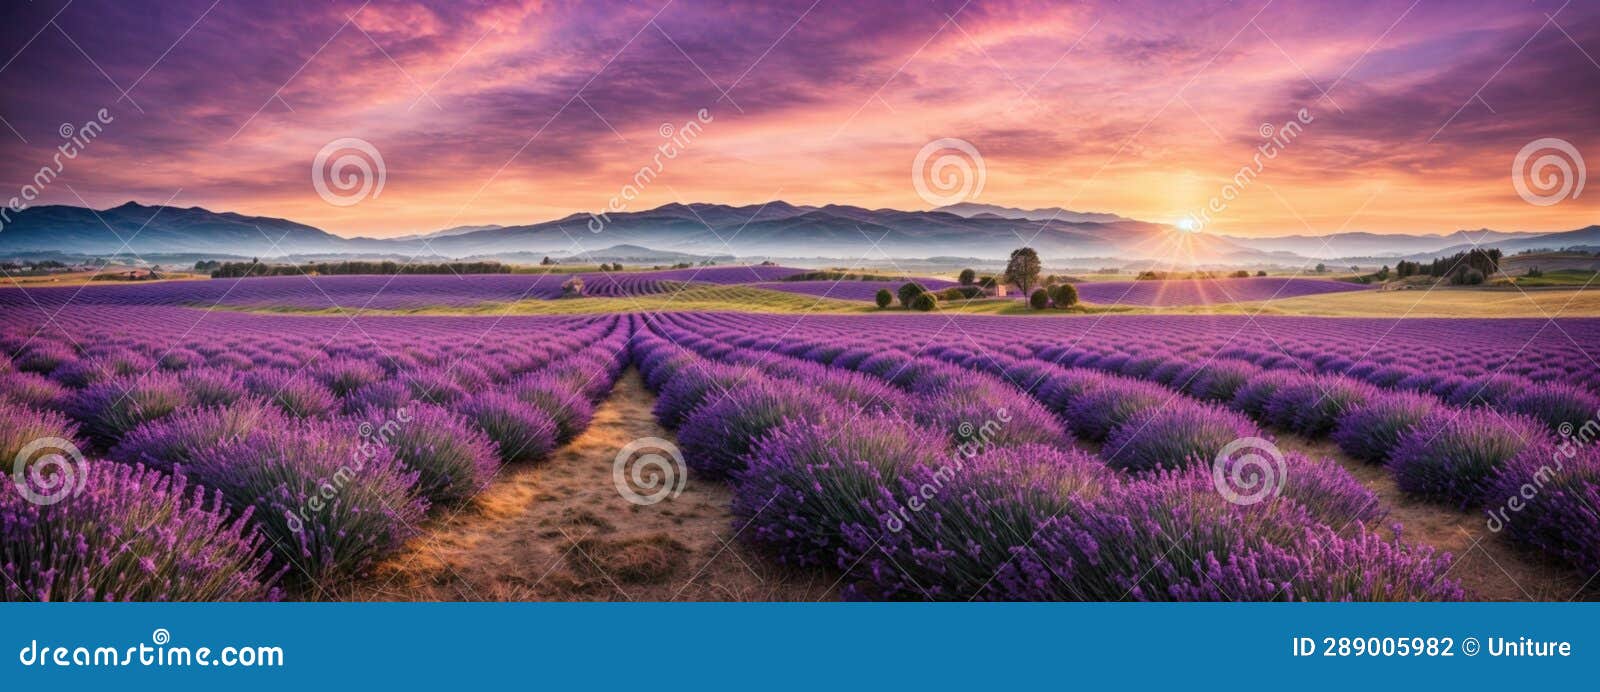 Stunning Landscape with Lavender Field at Sunset Stock Photo - Image of ...